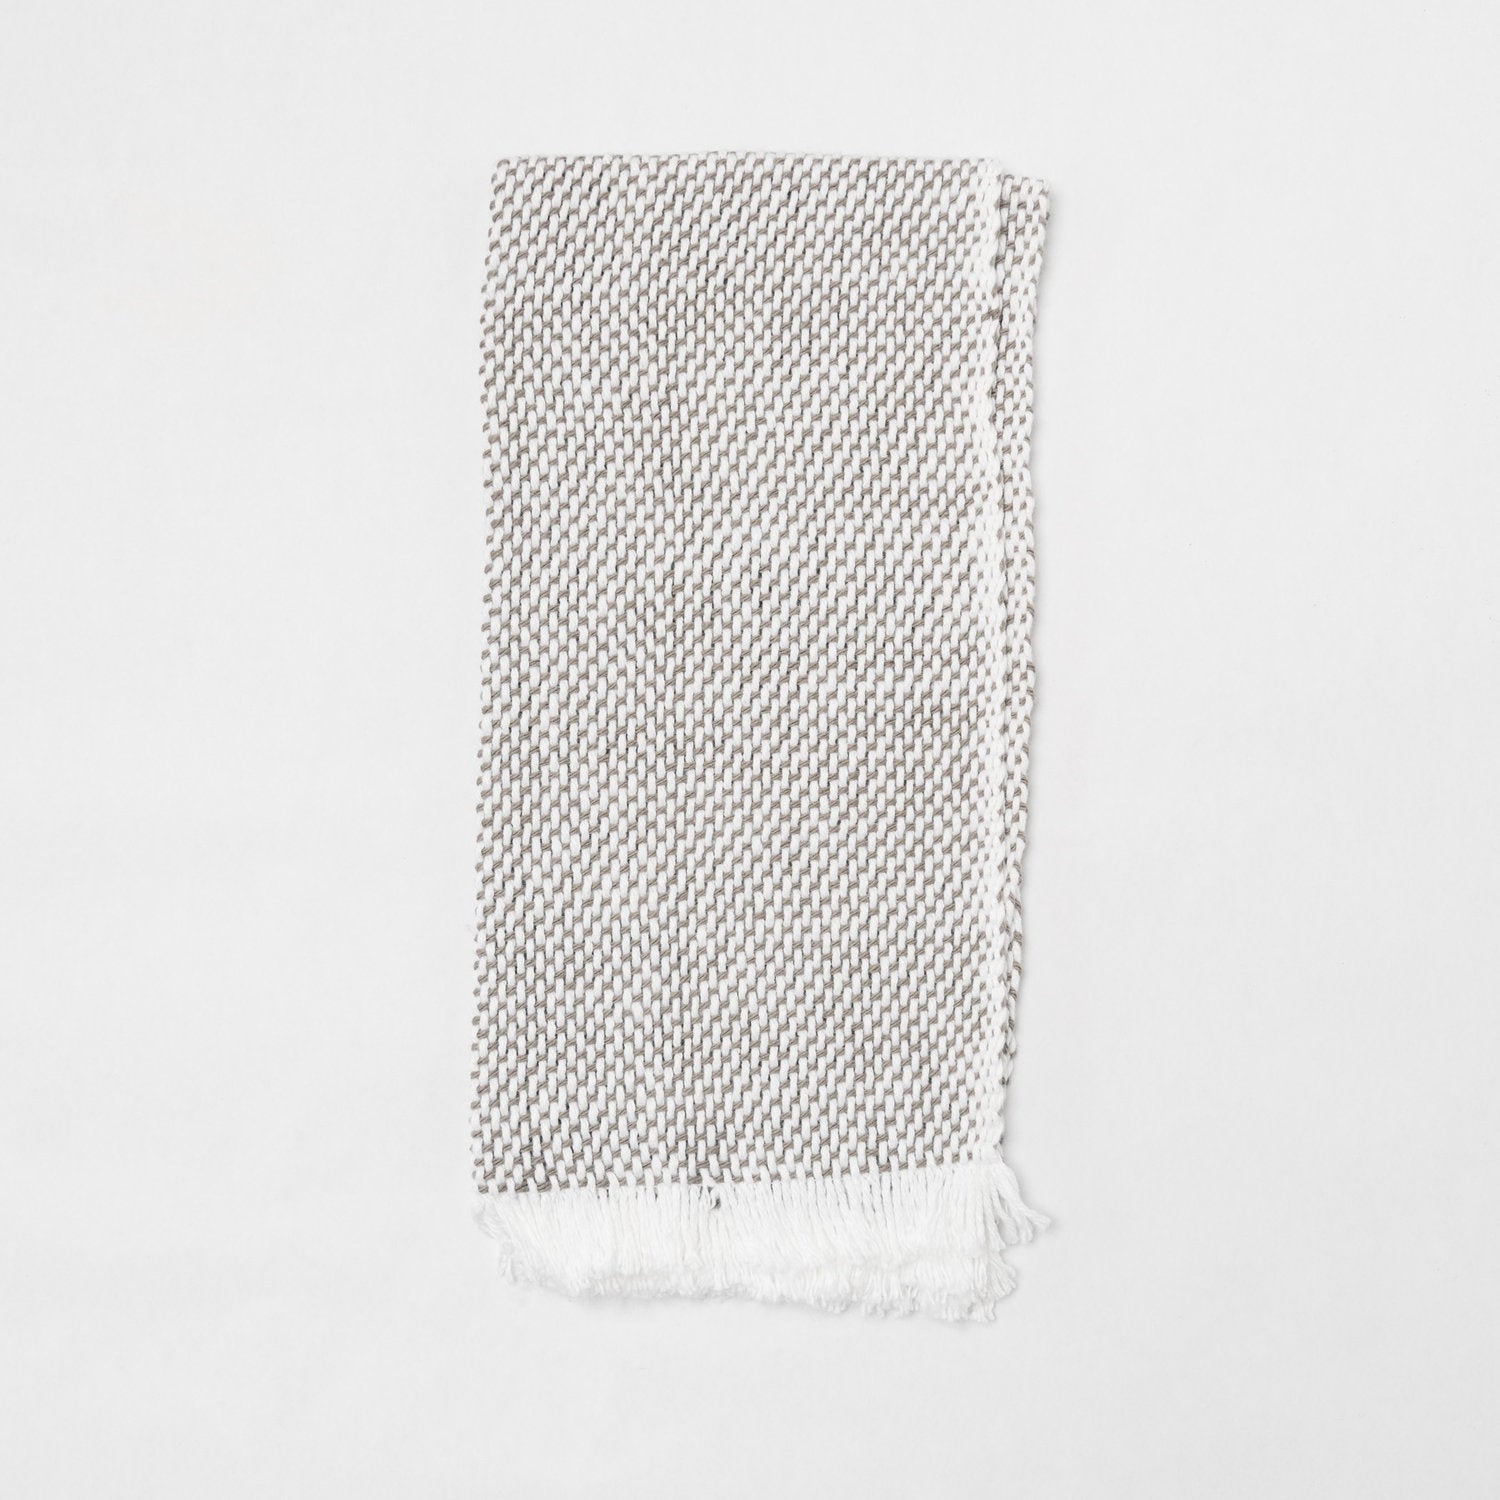 KD Weave Gray + White Hand Towel, Set of 2